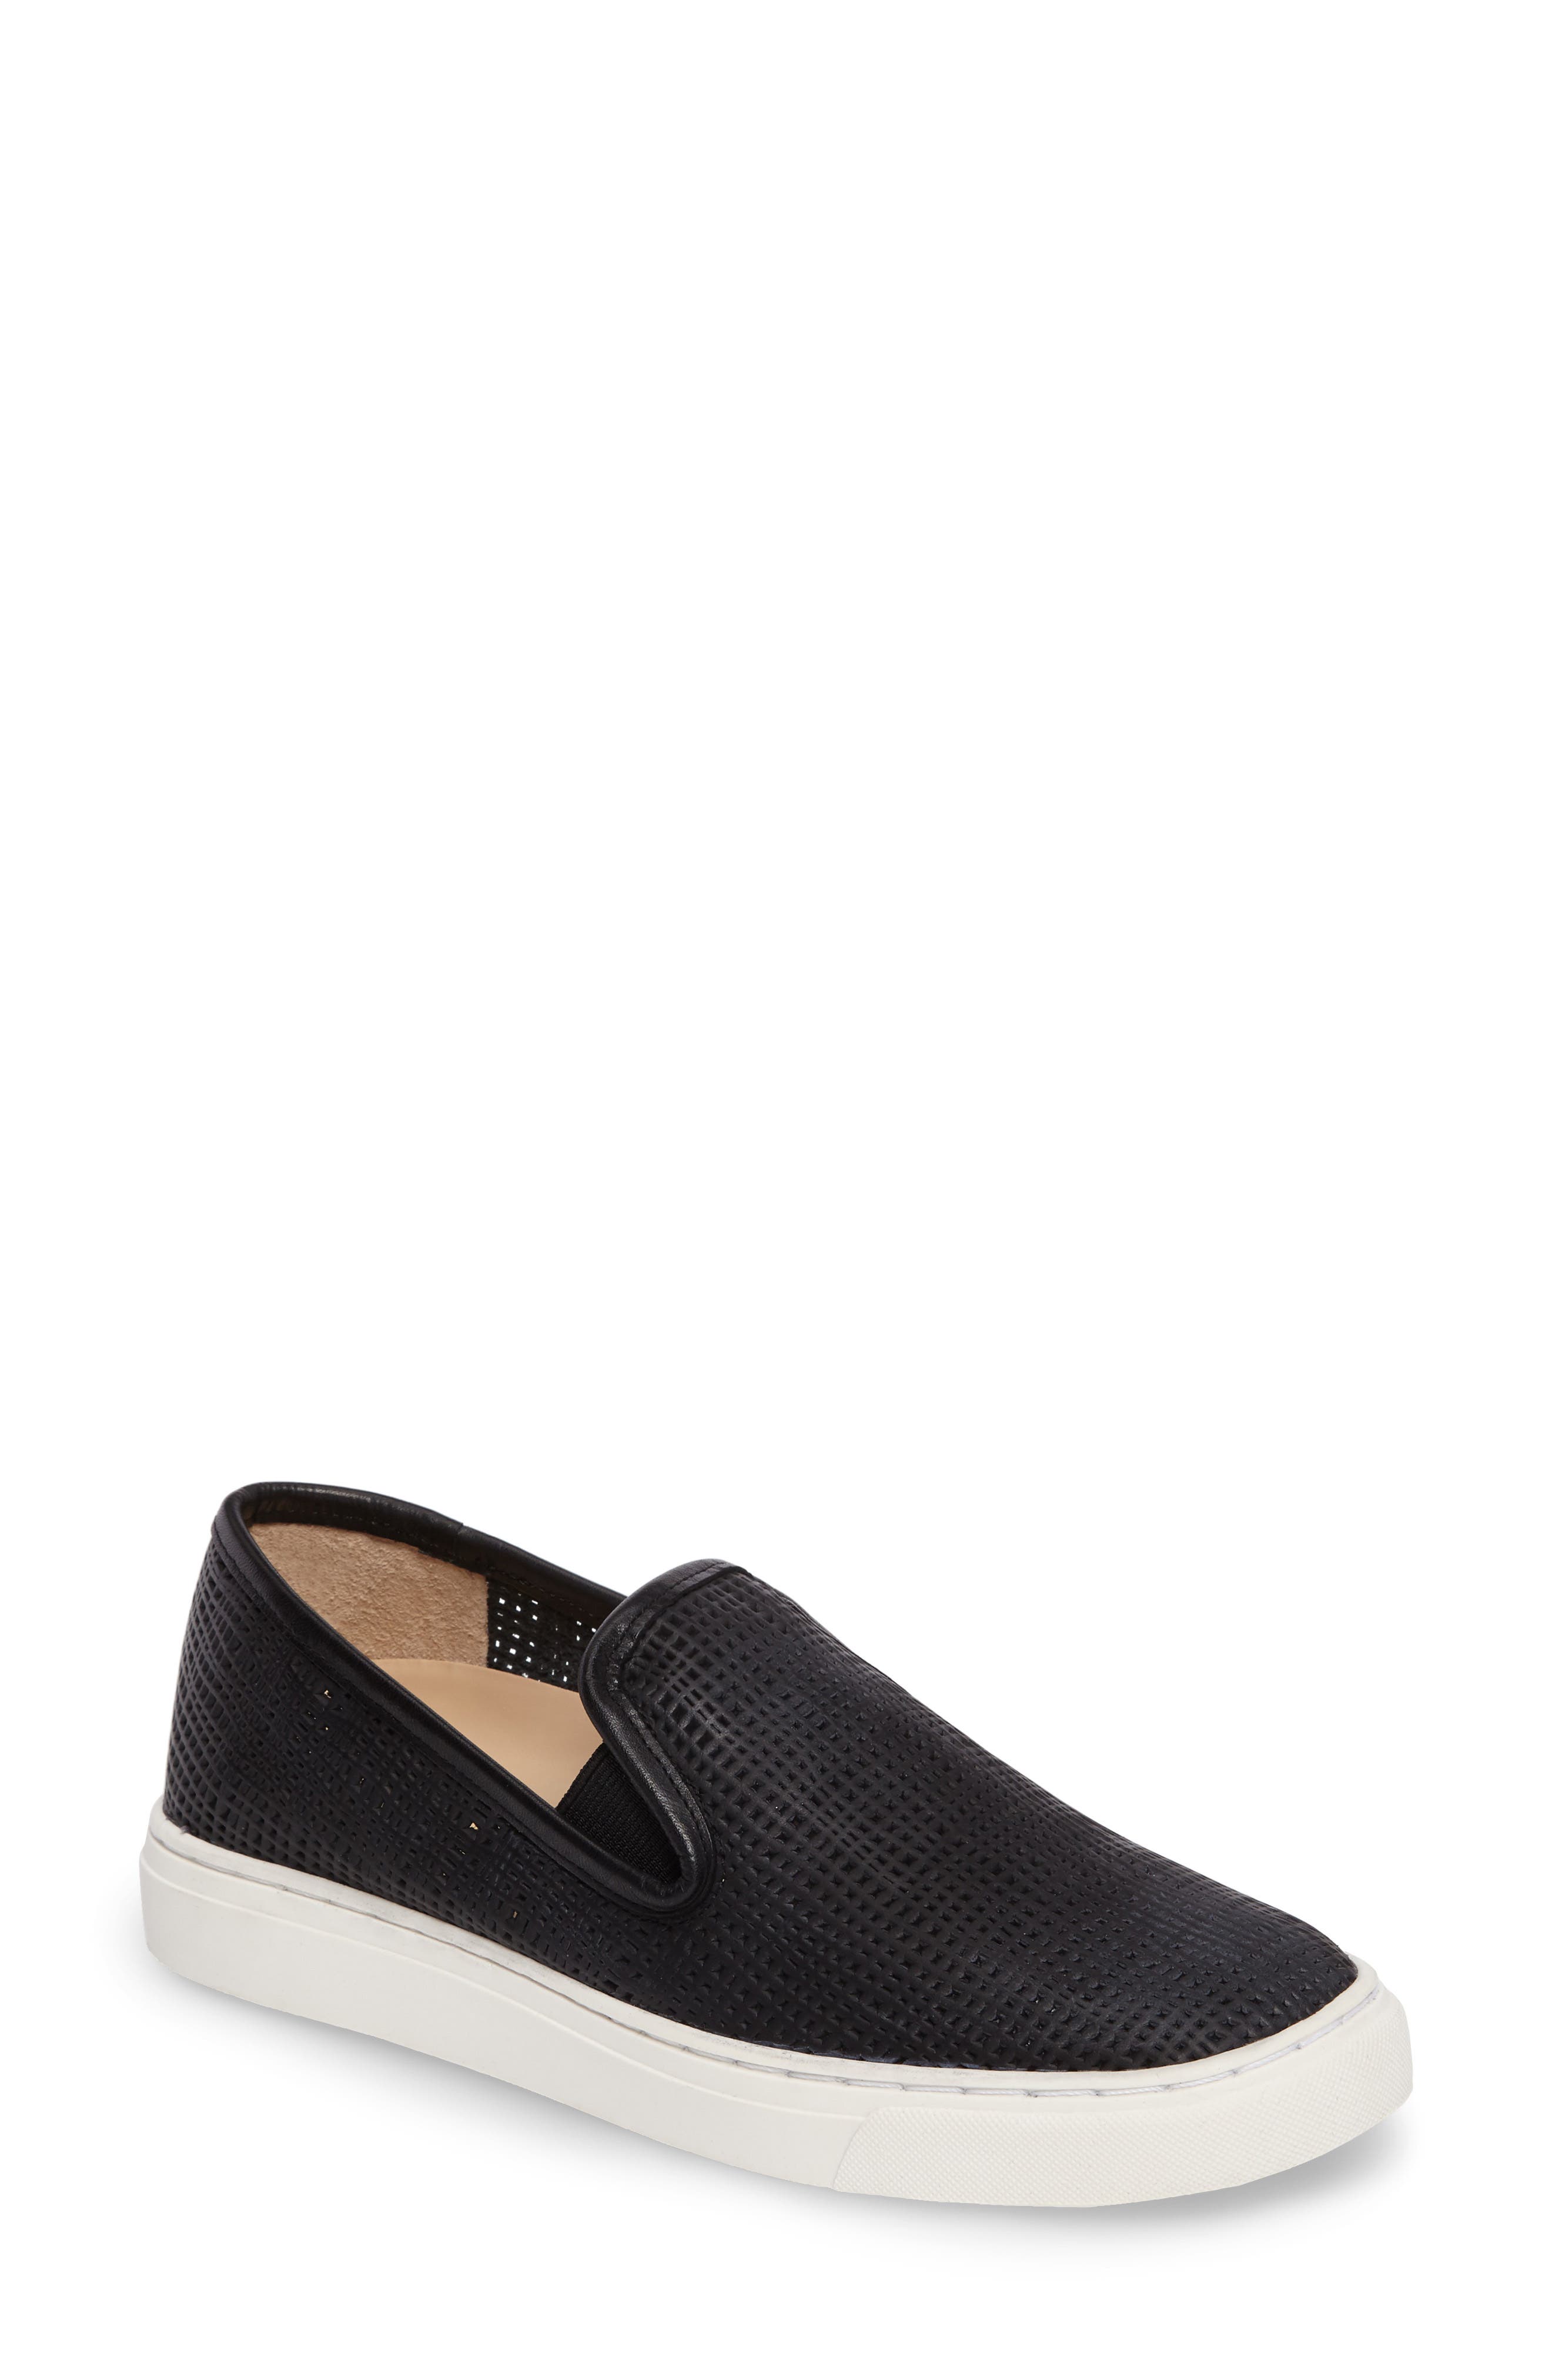 Vince Camuto Becker Perforated Slip-On 